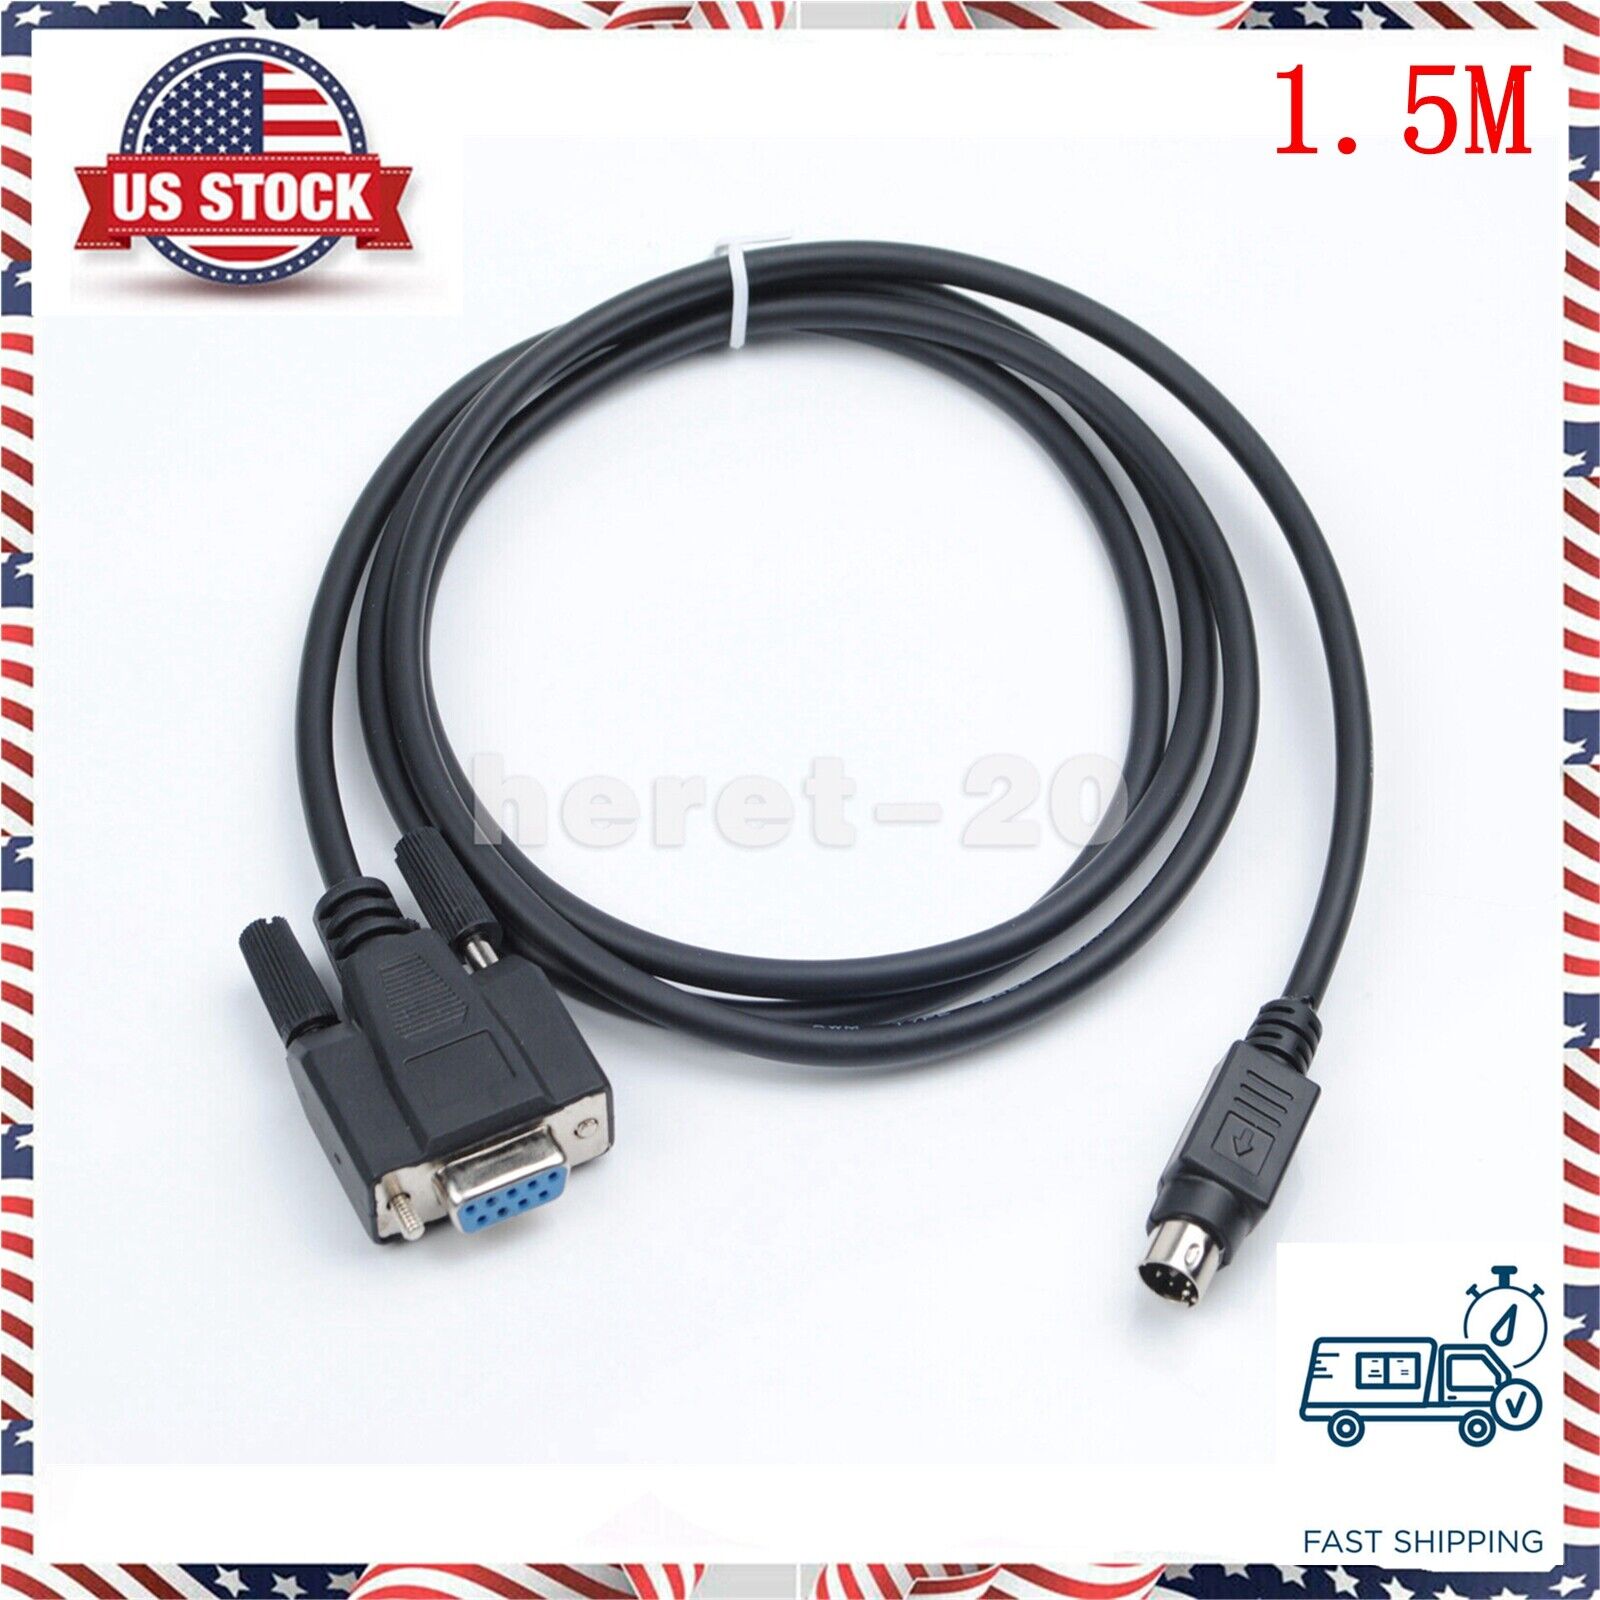 NEW Password Reset/Service Cable FOR DELL MD3200i MN657 MD1200 MD3200 MD3600i 